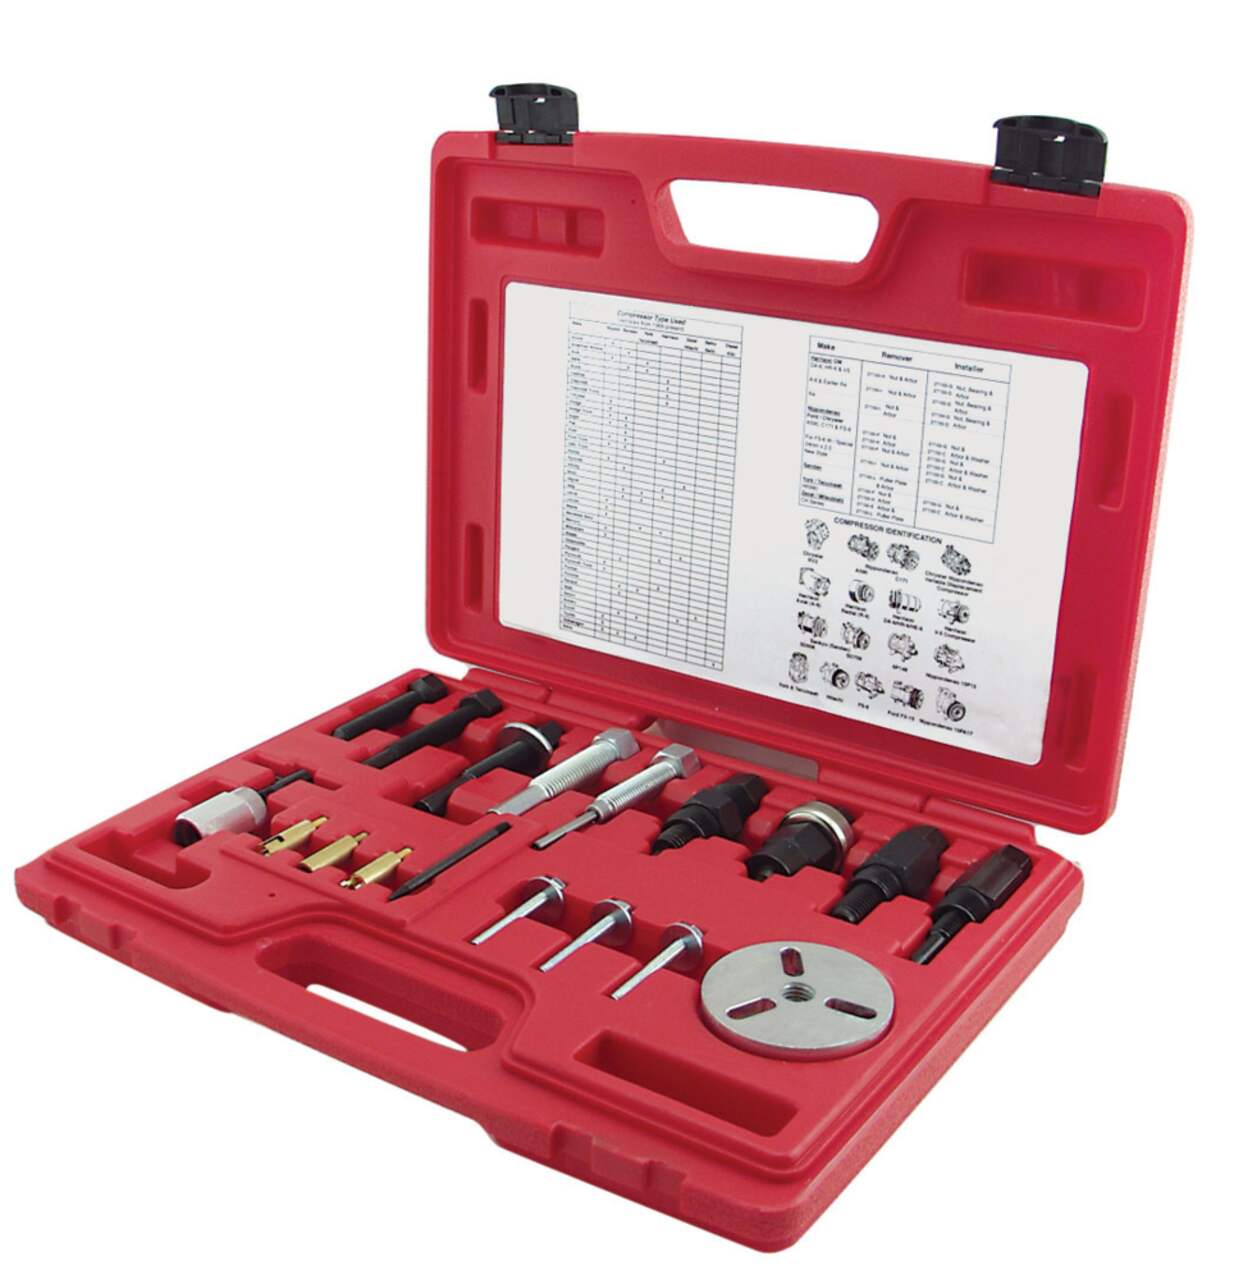 https://media-www.canadiantire.ca/product/automotive/auto-maintenance/oil-change-and-fuel-accessories/1250012/oemtools-a-c-clutch-tool-kit-bbe0e89b-2afc-4319-bc4a-e600e3c220ac.png?imdensity=1&imwidth=640&impolicy=mZoom